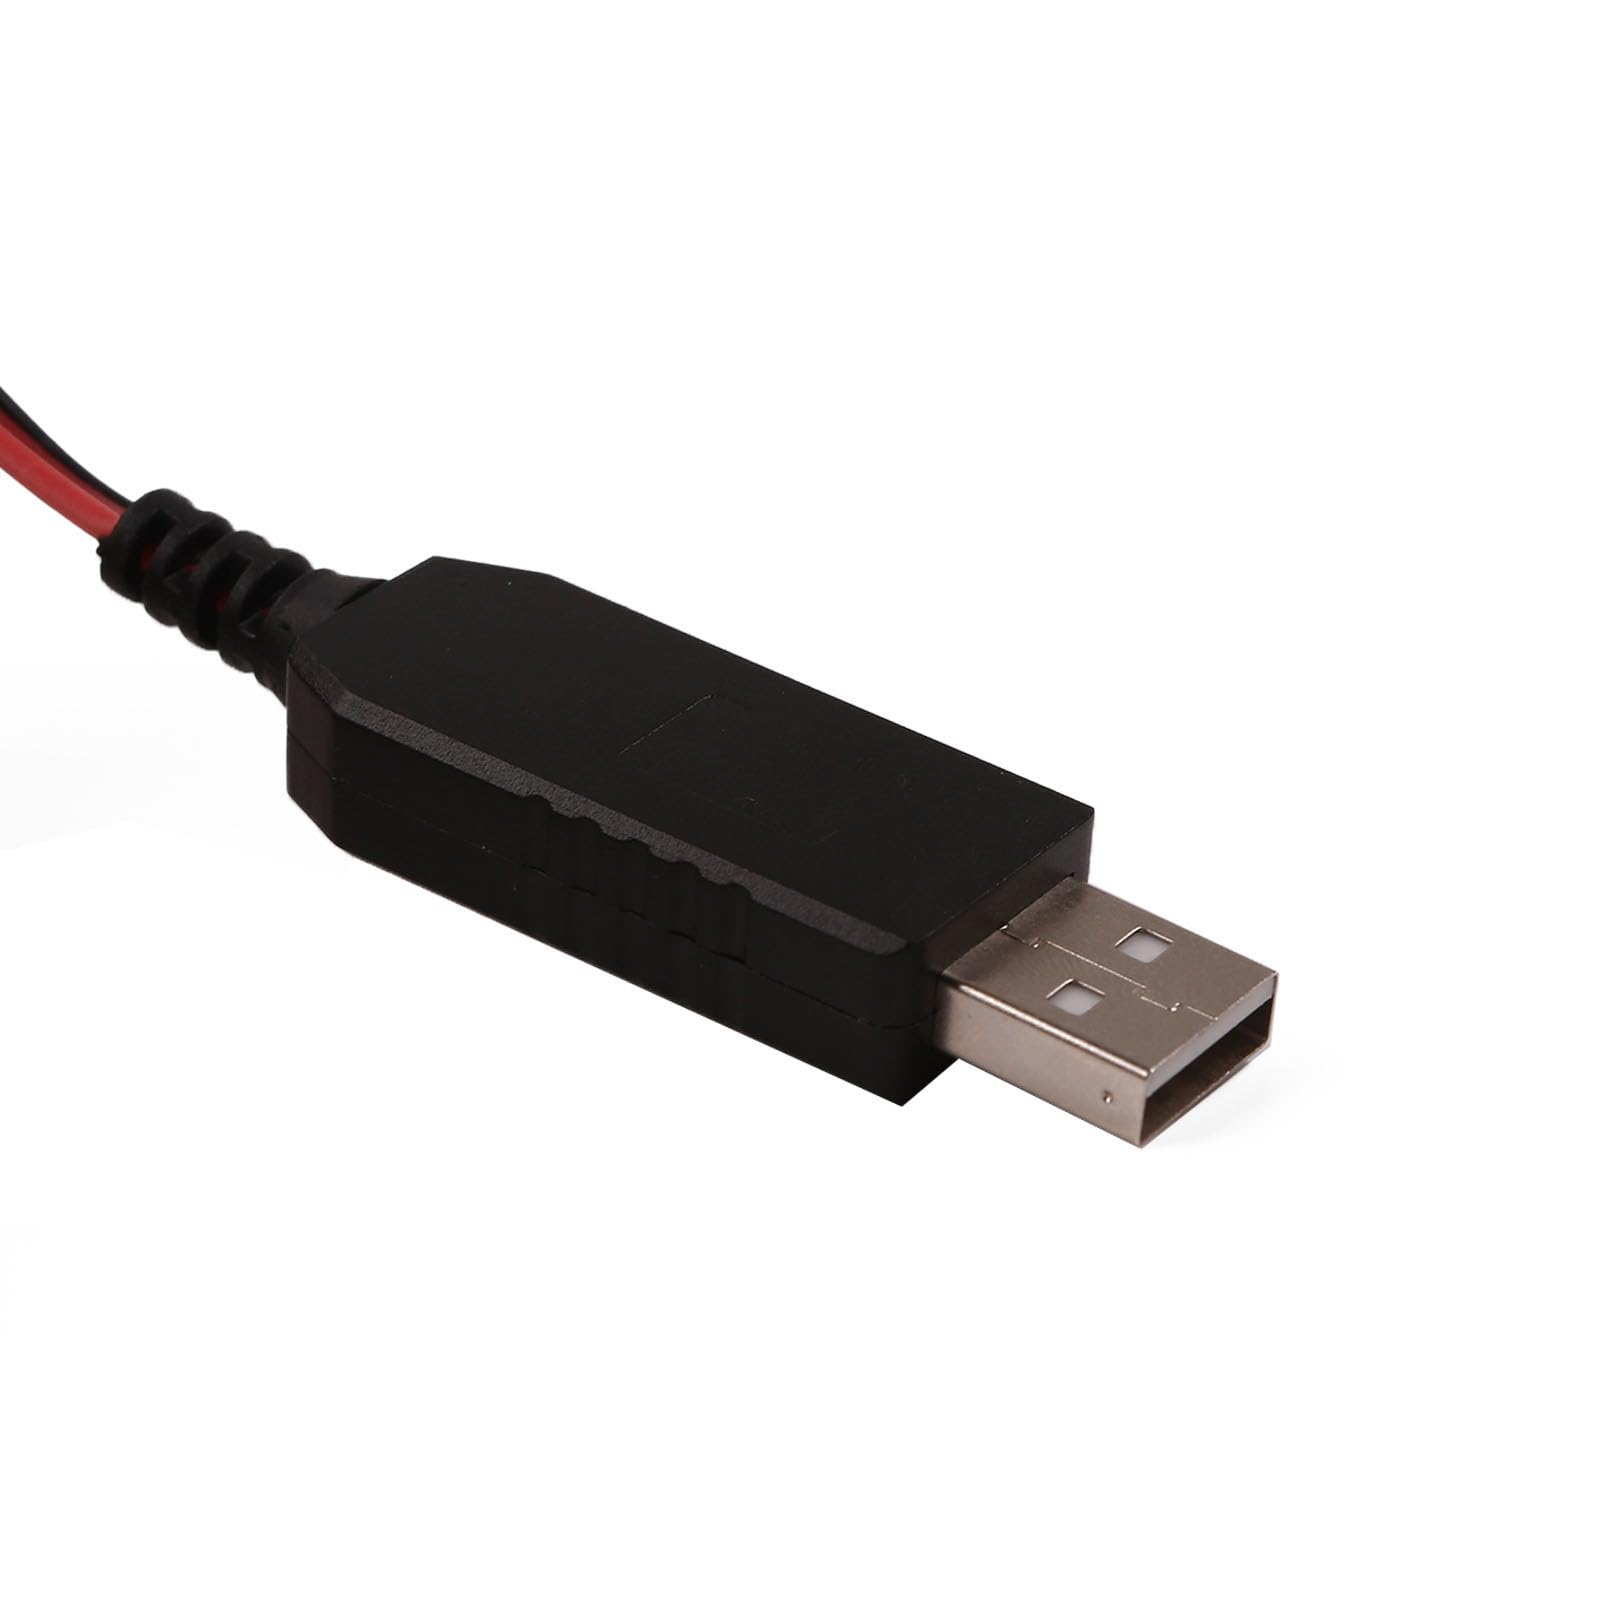 kmobruzy LR14 C Battery USB Power Supply Cable Replace 4 LR14 C Batteries Replace 4 X 1.5V Battery LR14 C Battery